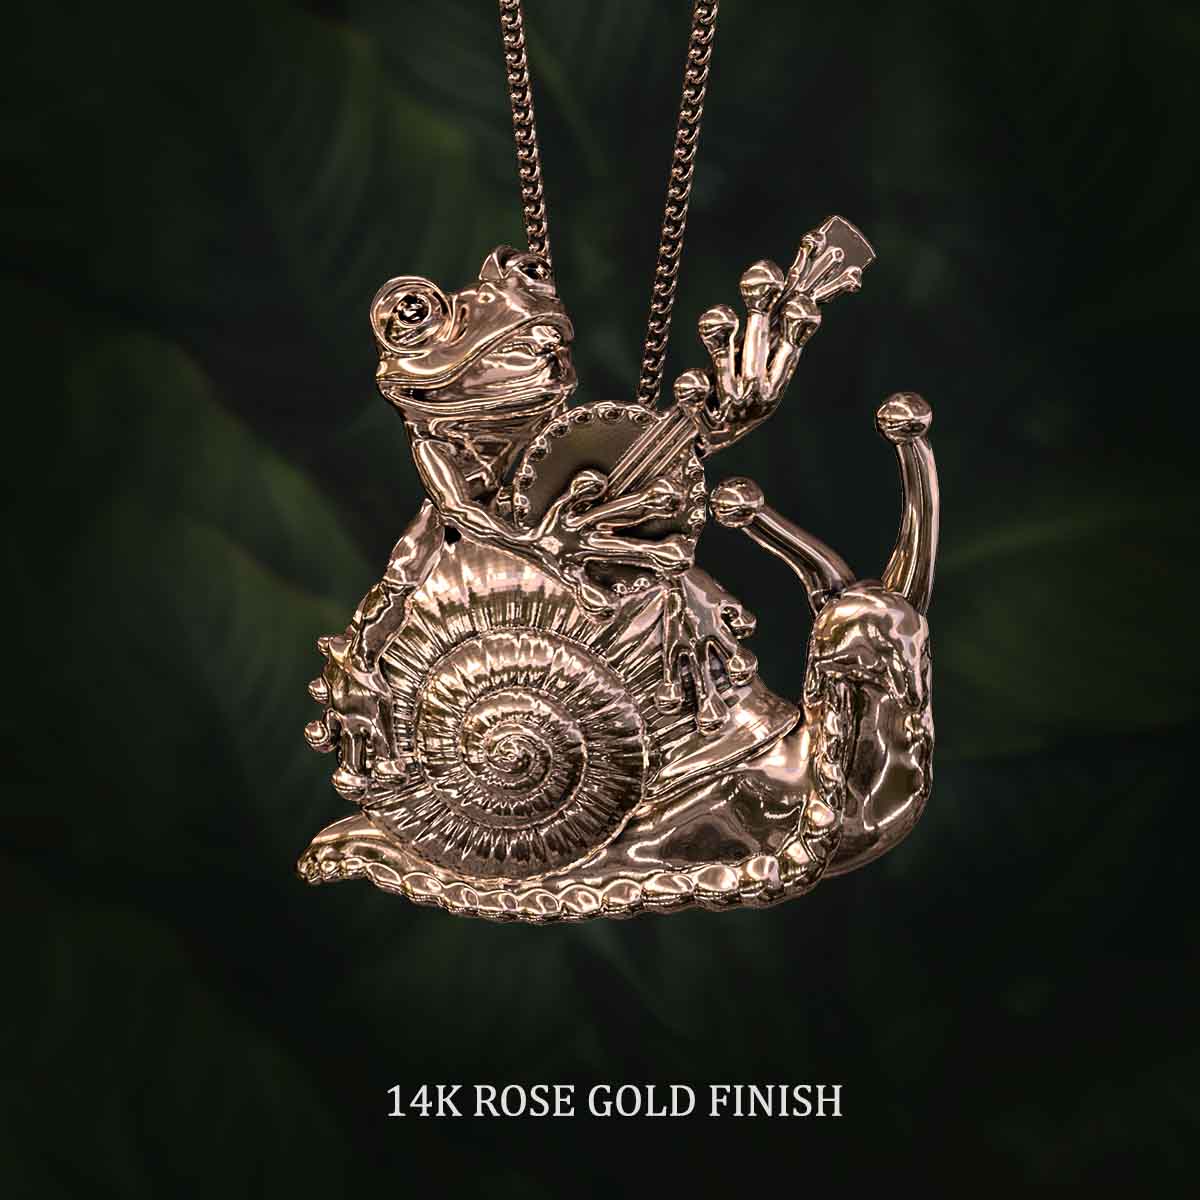    14k-Rose-Gold-Finish-Serenading-Frog-and-Snail-Pendant-Jewelry-For-Necklace